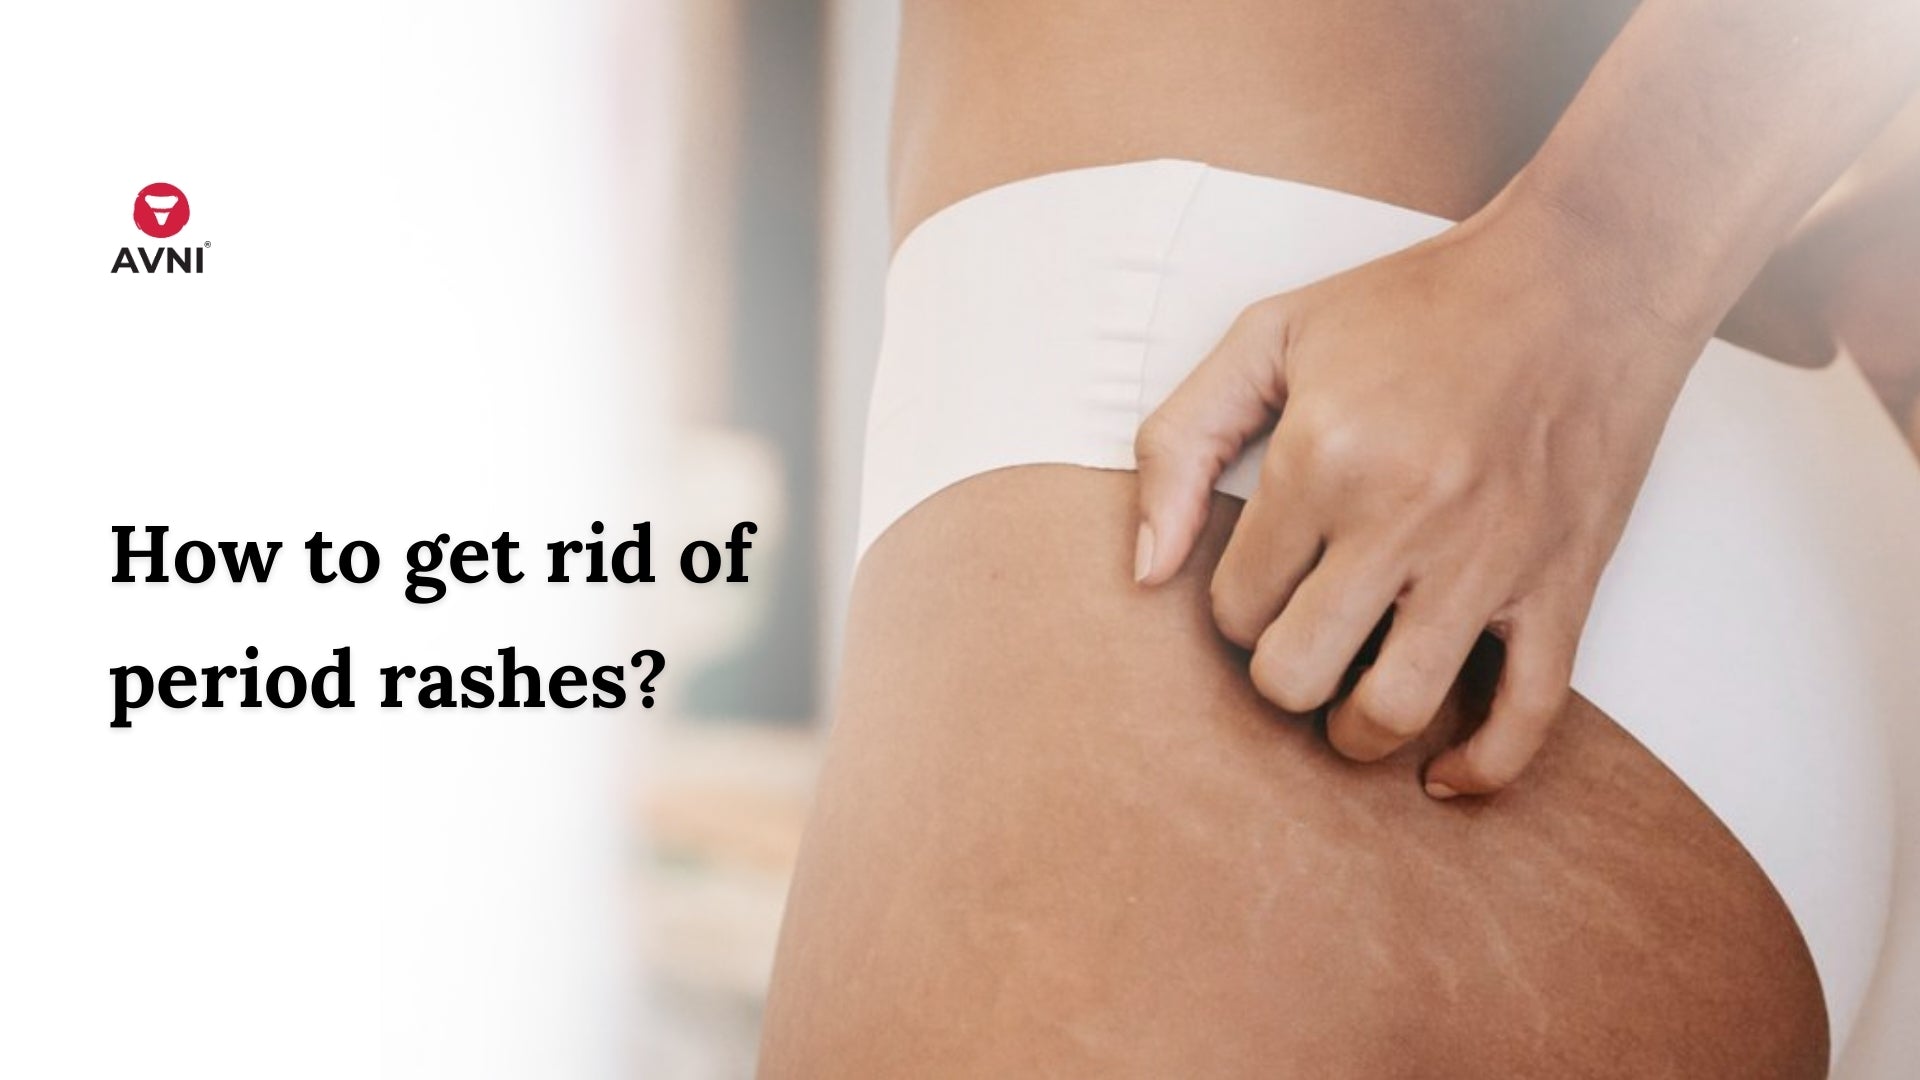 How to get rid of period rashes?